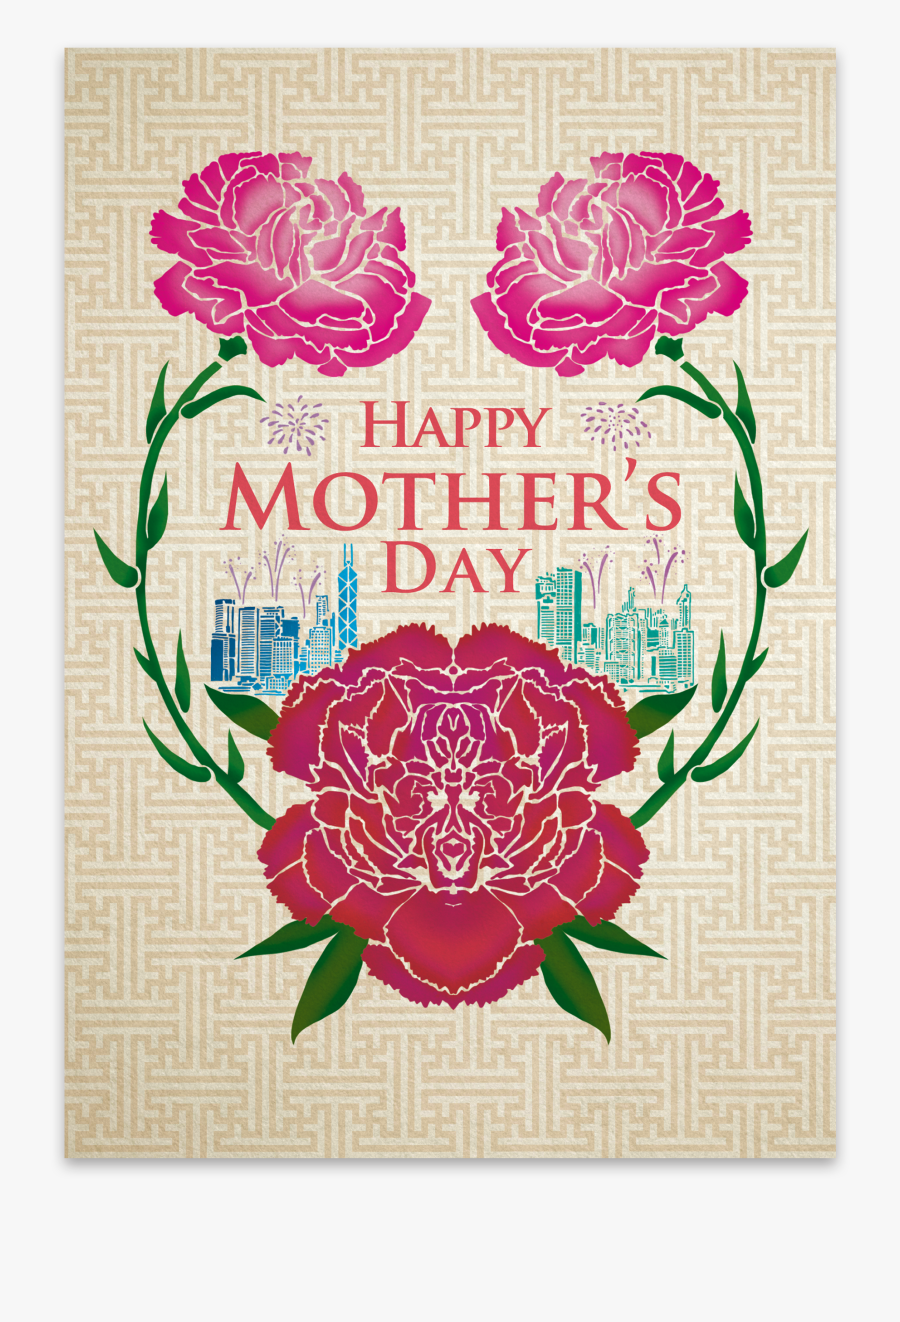 Hong Kong Gift Present Hk Themed Mothers Day Card - Greeting Card, Transparent Clipart